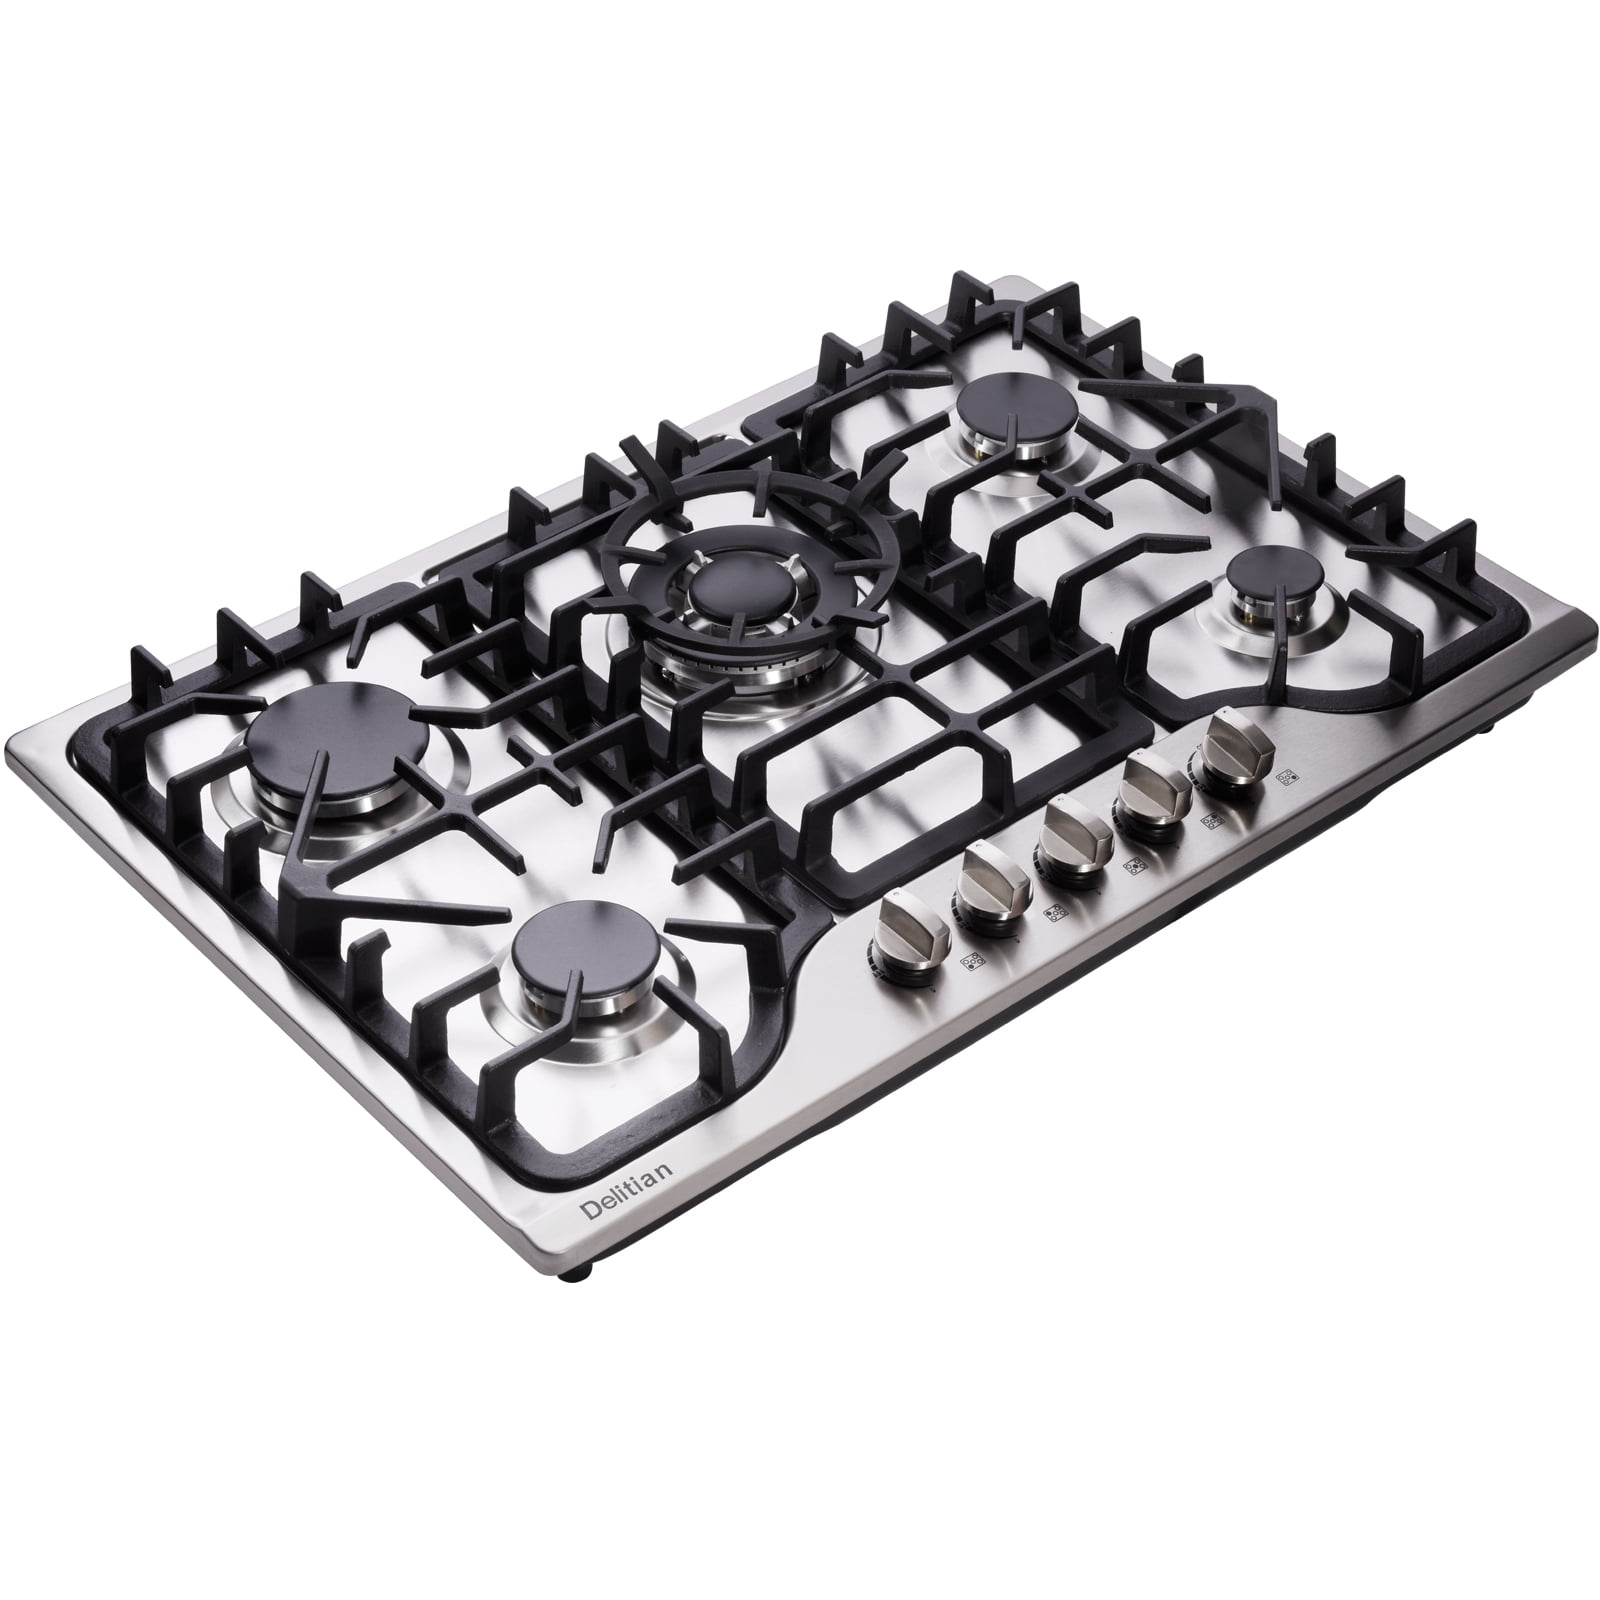 WUZSTAR 5 Burners Built-in Gas Cooktop,Stainless Steel Gas Hob Stove  Automatic Pulse Ignition Countertop Stove